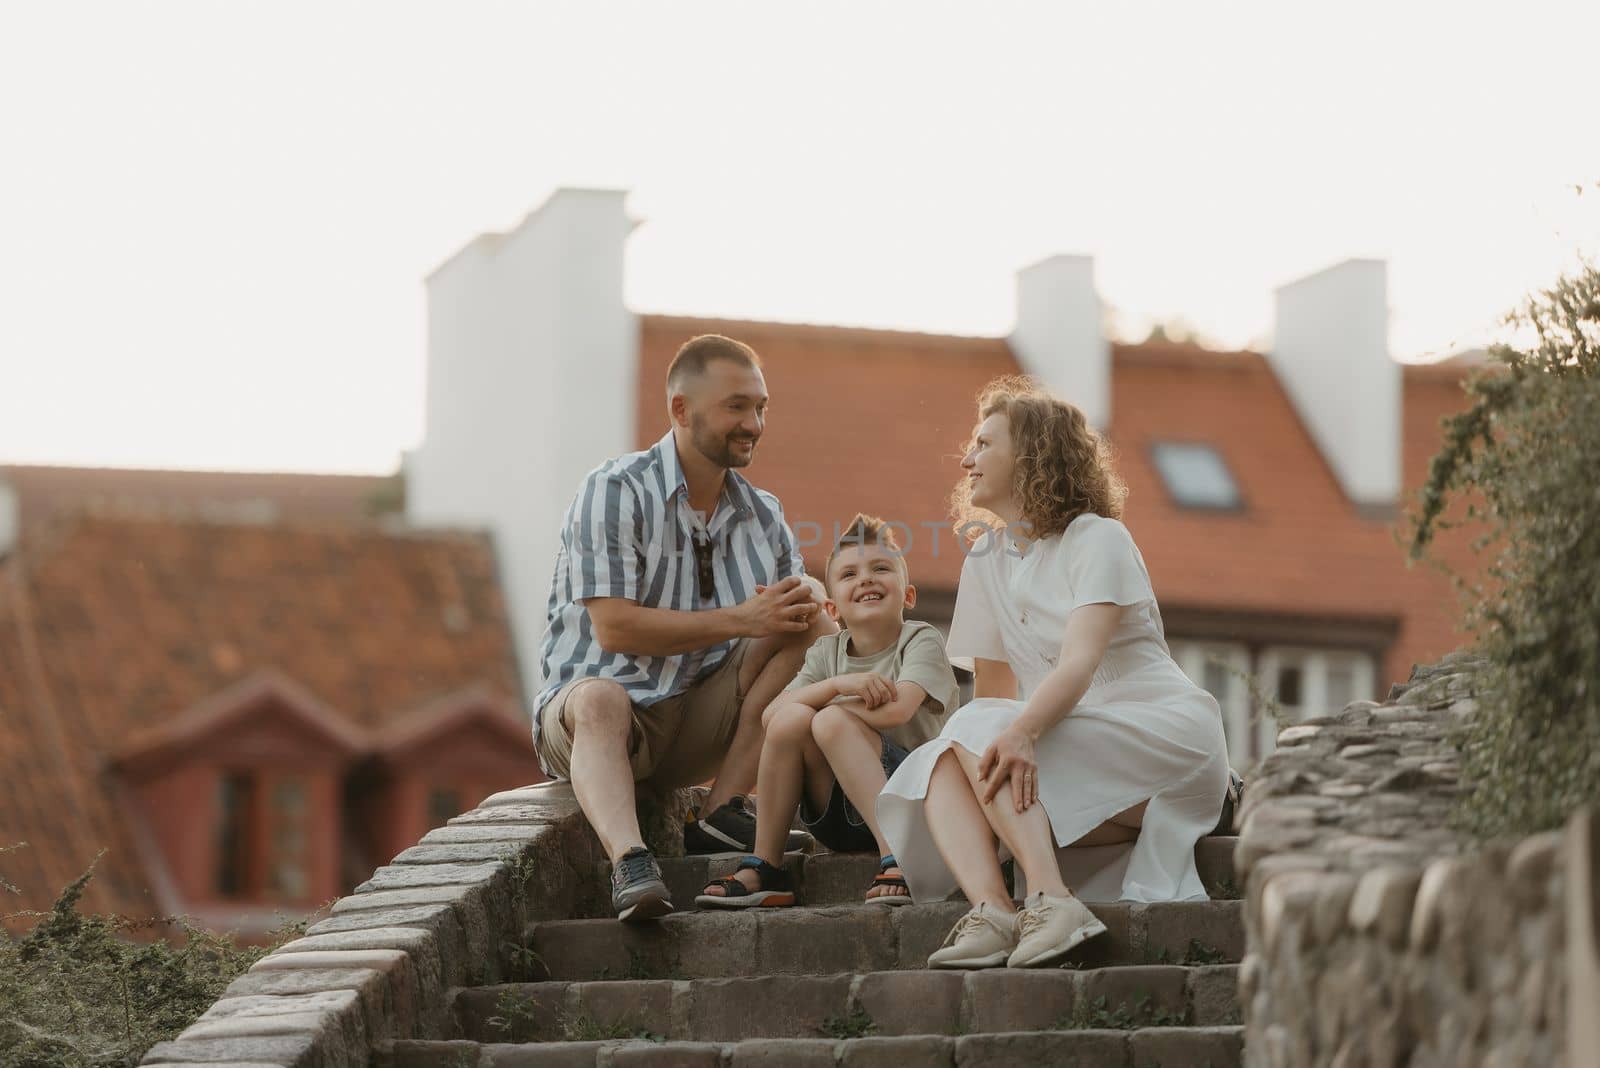 A smiling family is joking on the stairs between roofs in an old European town. A happy father, mother, and son are having fun in the evening.